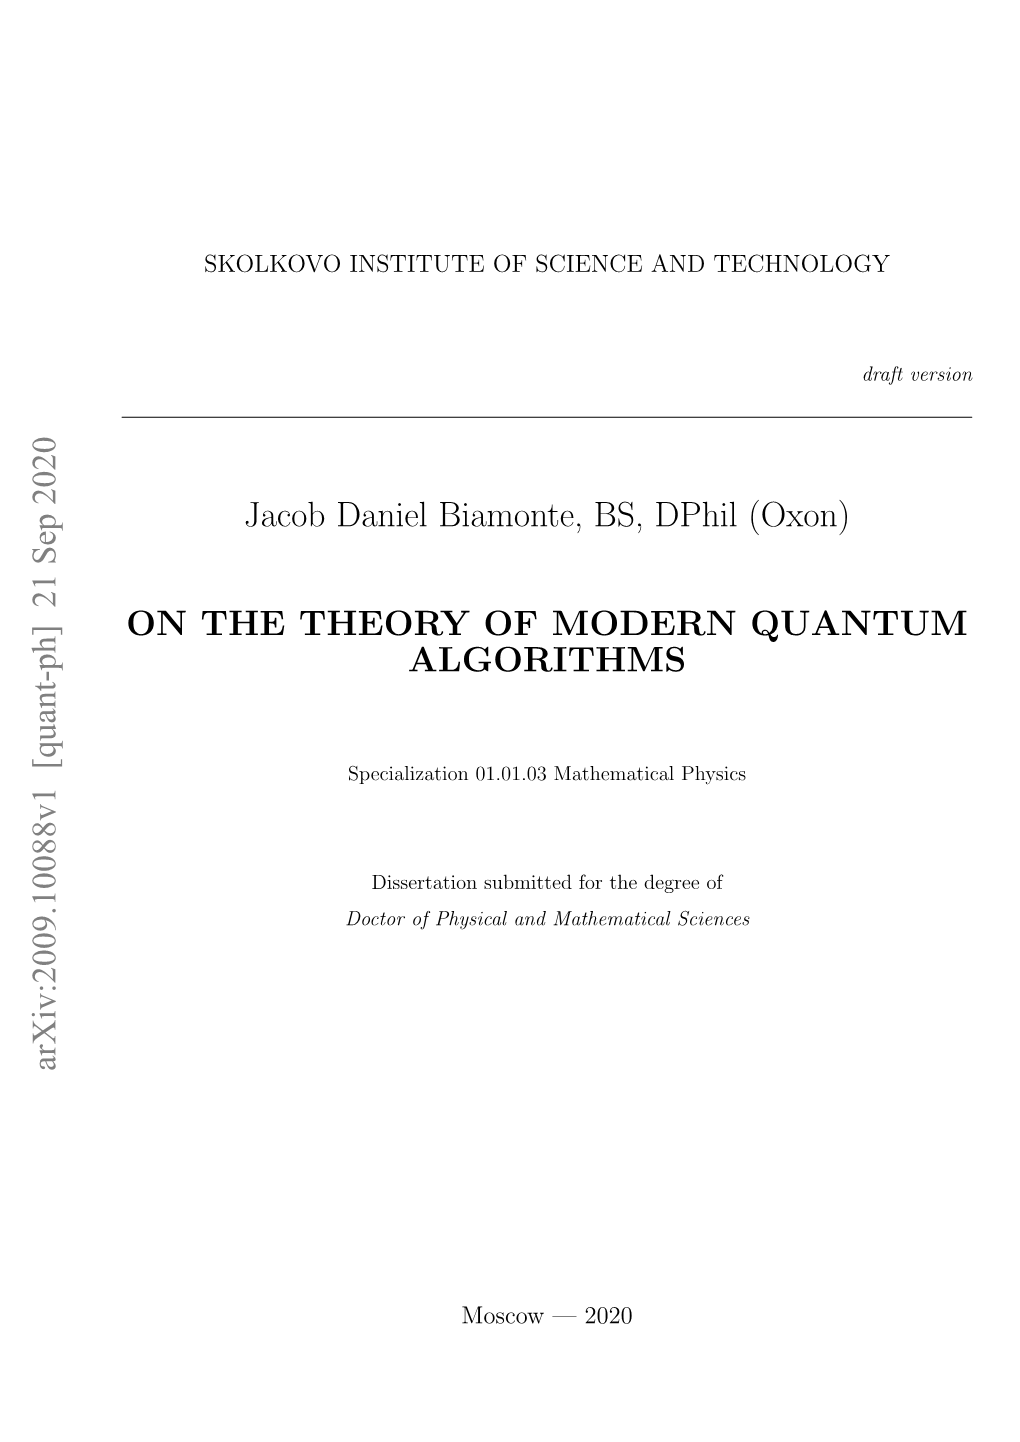 (Oxon) on the THEORY of MODERN QUANTUM ALGORITHMS